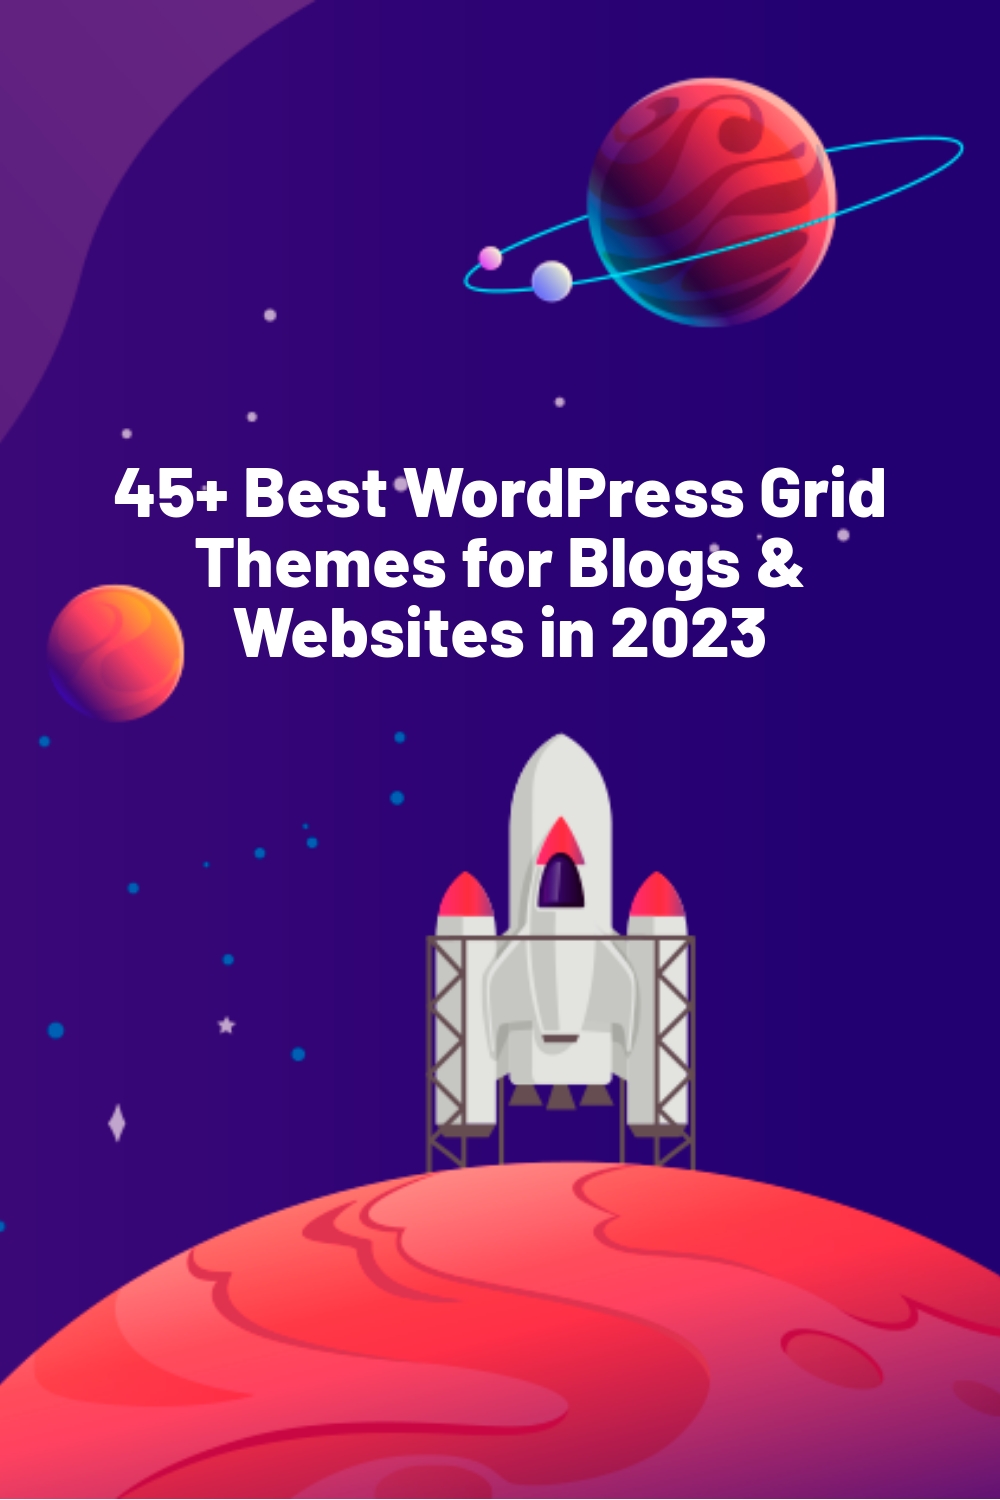 45+ Best WordPress Grid Themes for Blogs & Websites in 2023